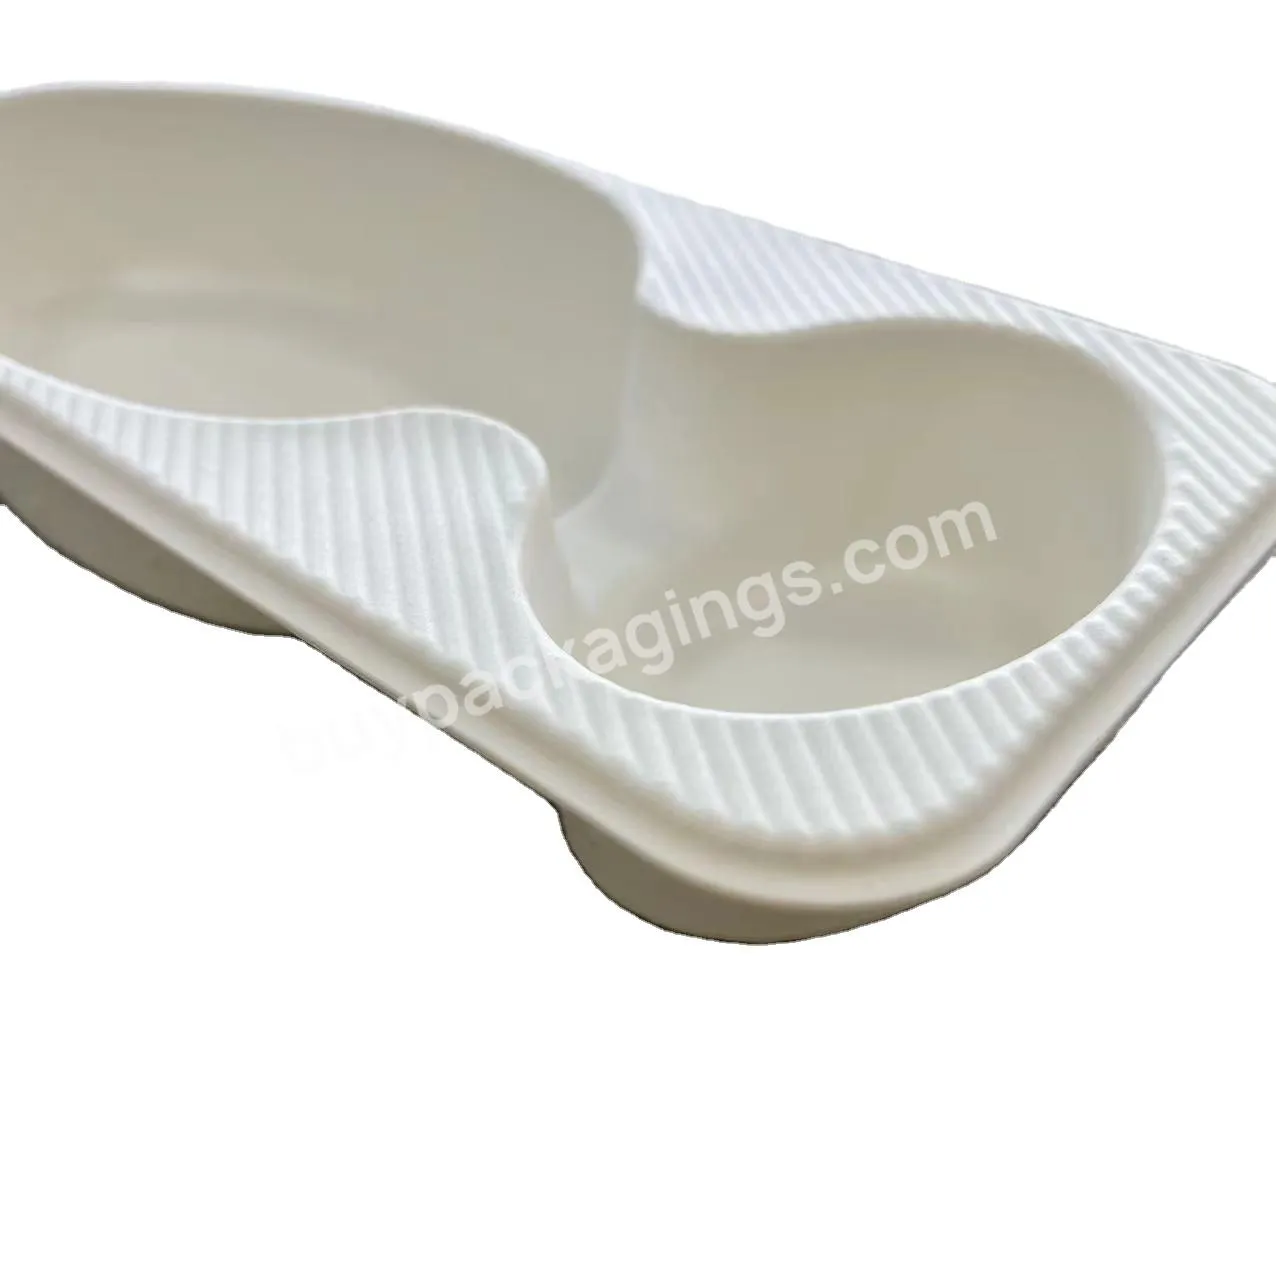 Bio Degradable Recycle Wet Press Bagasse Natural Fiber Packaging Bagasse Pulp Molded Tray Paper Pulp Packaging Insert - Buy Pulp Molded Paper Tray Recycle Molded Paper Pulp,Bio Degradable Natural Fiber Molded Tray Packaging Custom Paper Pulp For Cosm